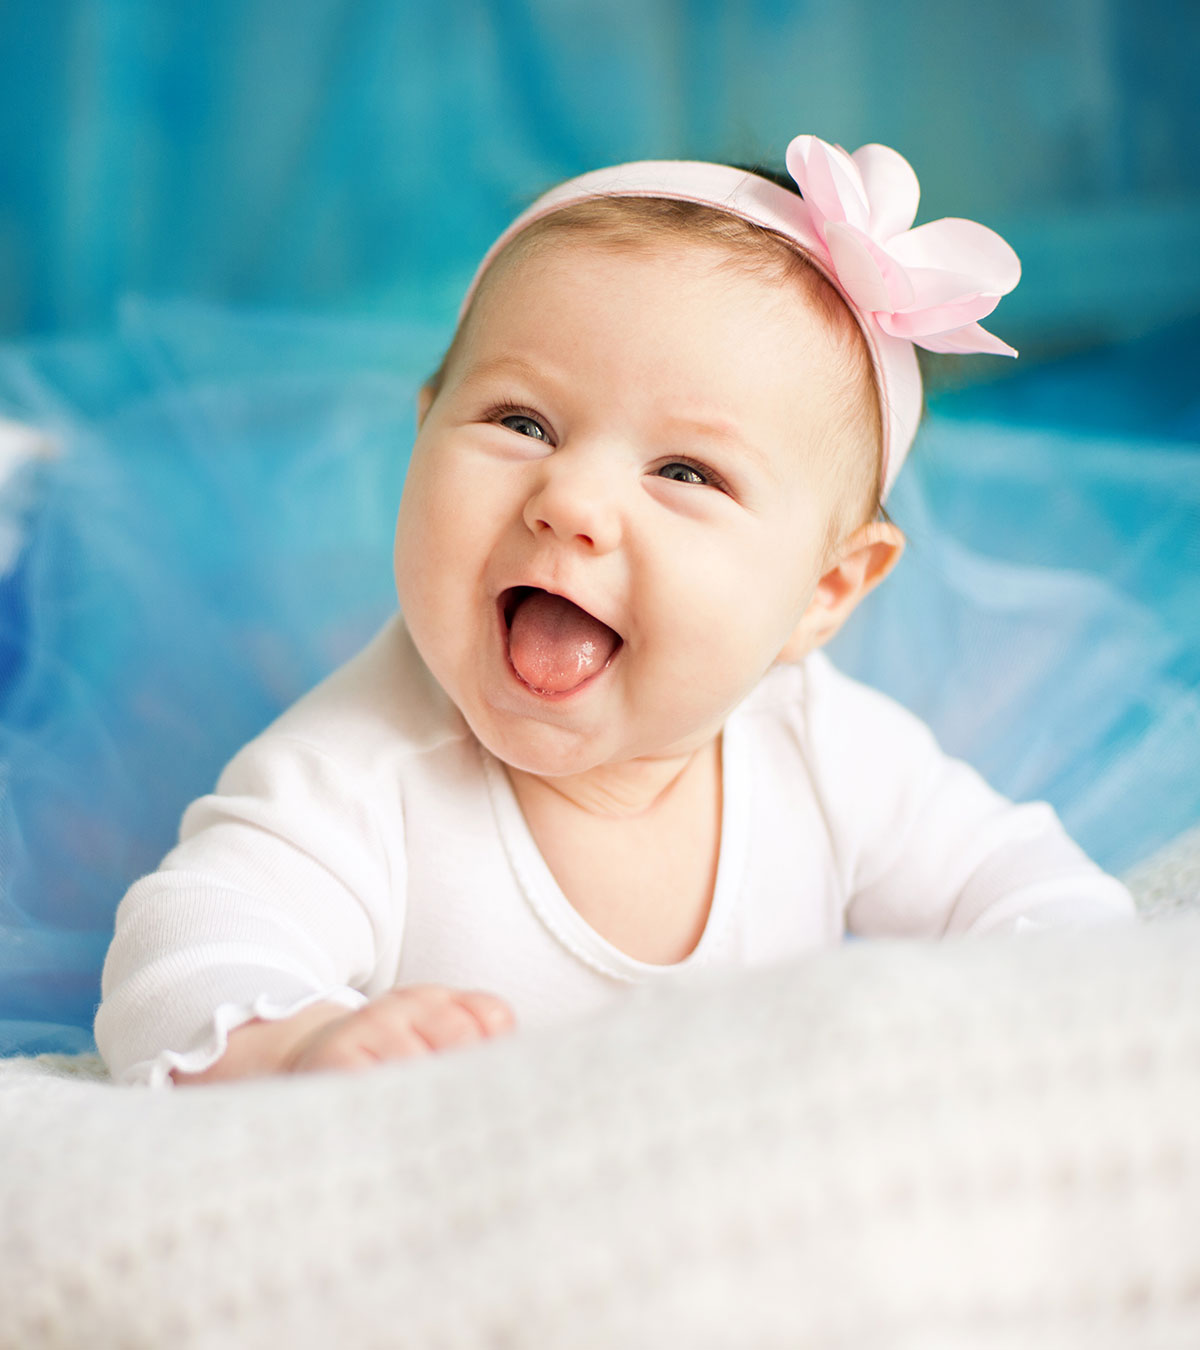 Baby Names Based on Numbers